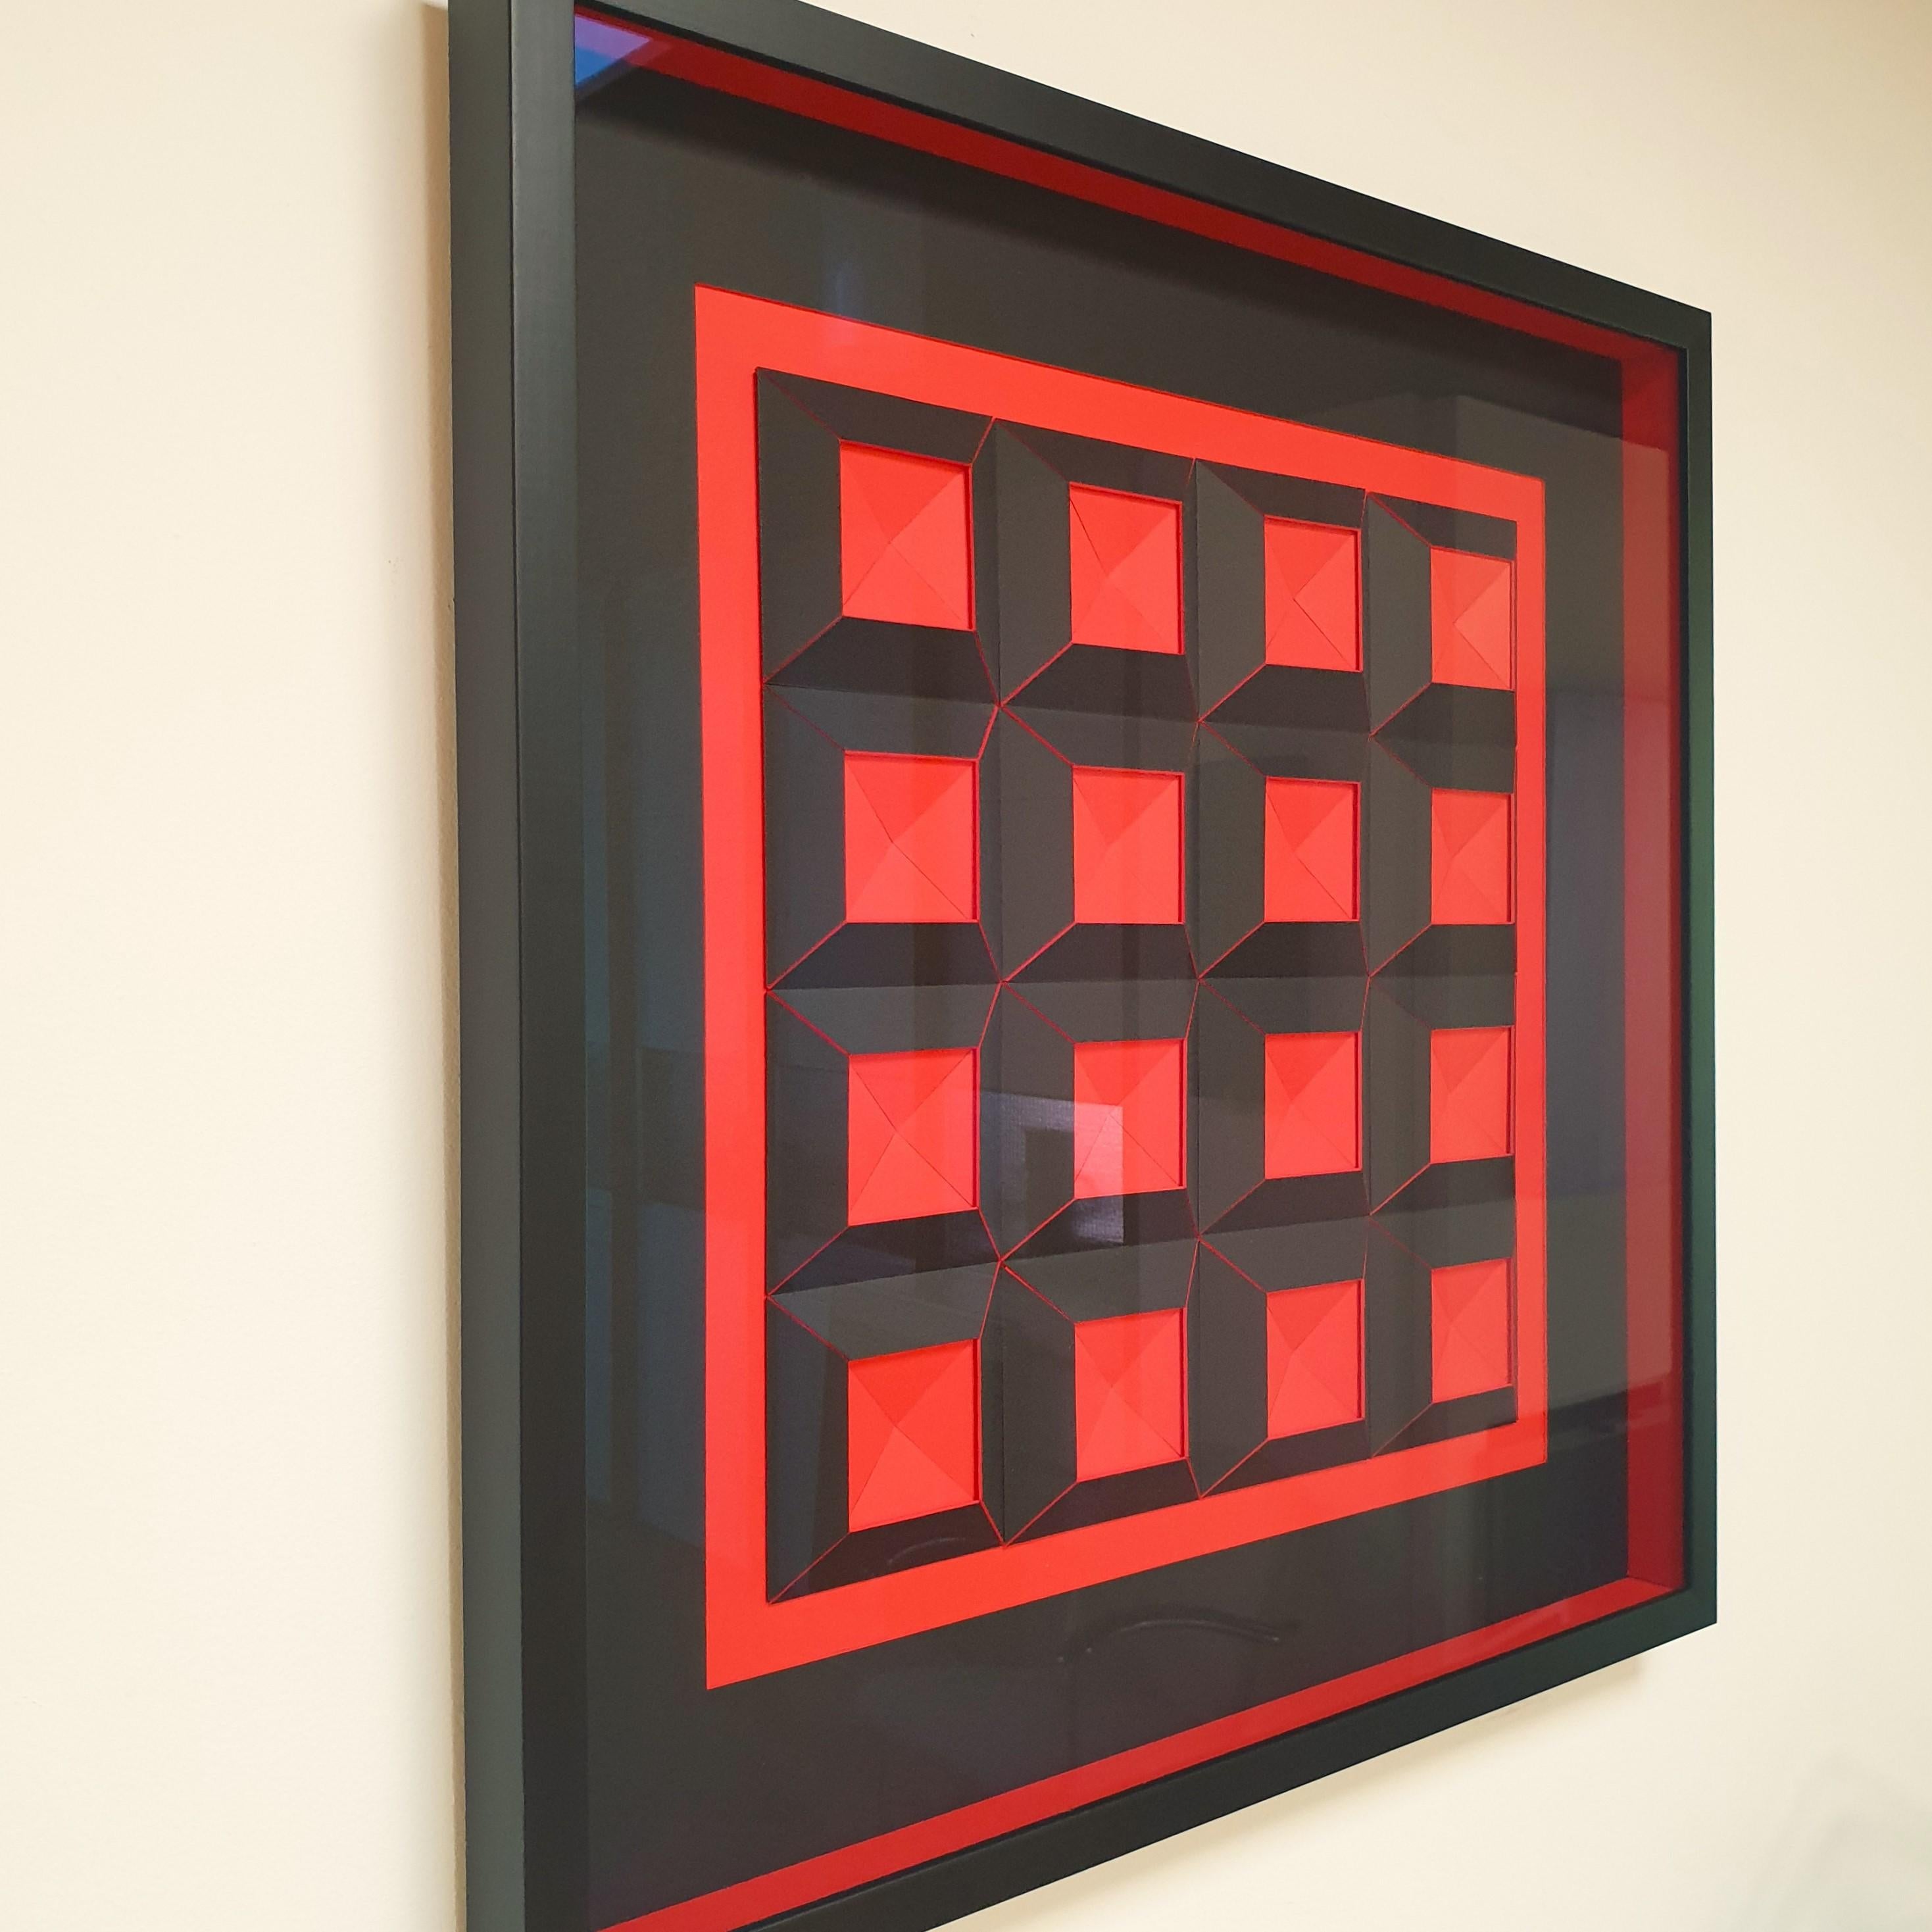 16 red/black quadrants RZ - contemporary modern abstract painting relief - Black Abstract Sculpture by Eef de Graaf